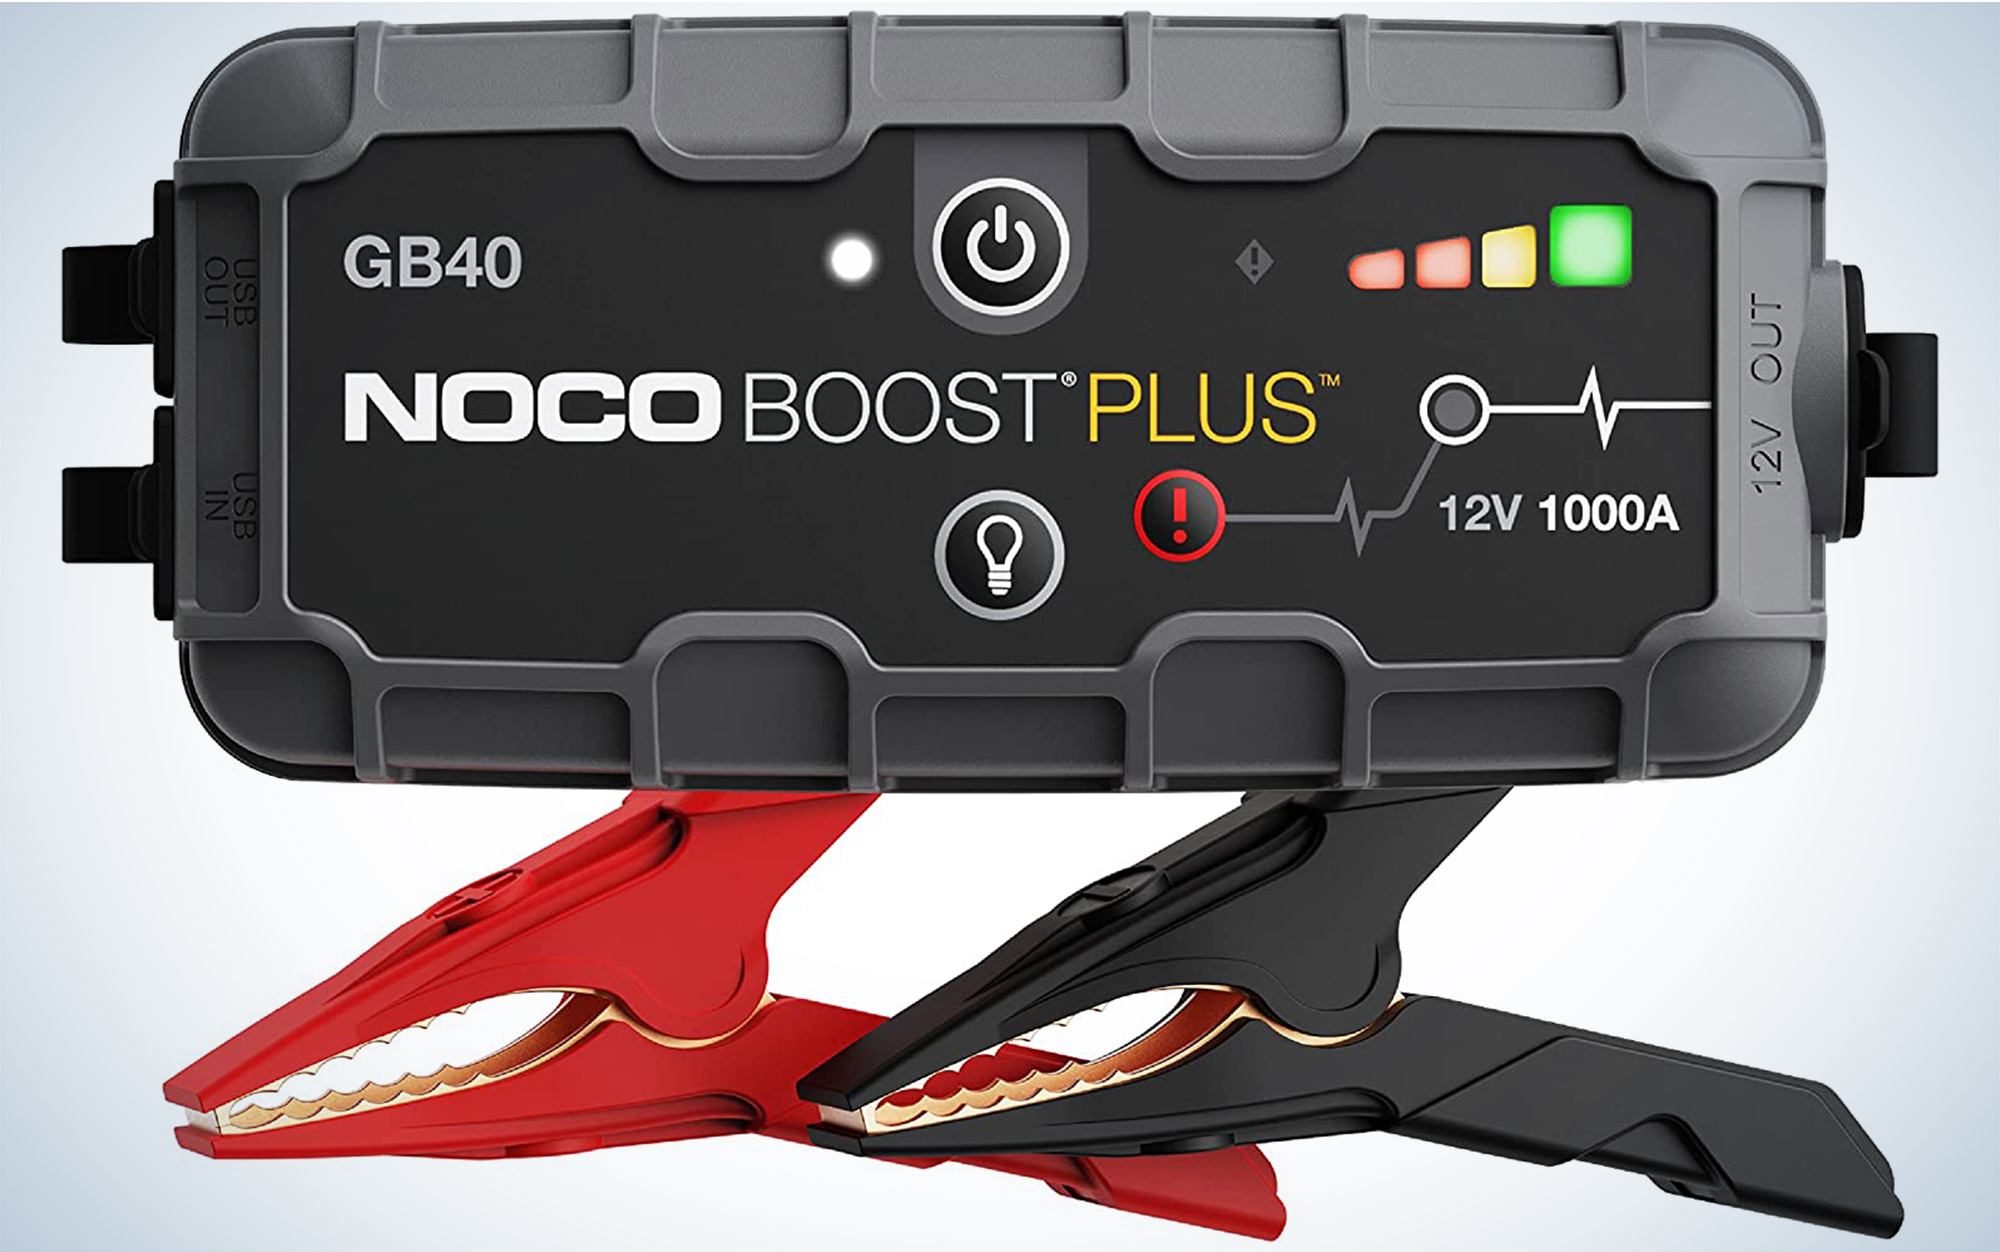 The Noco Boost Plus GB40 is best for all weather.